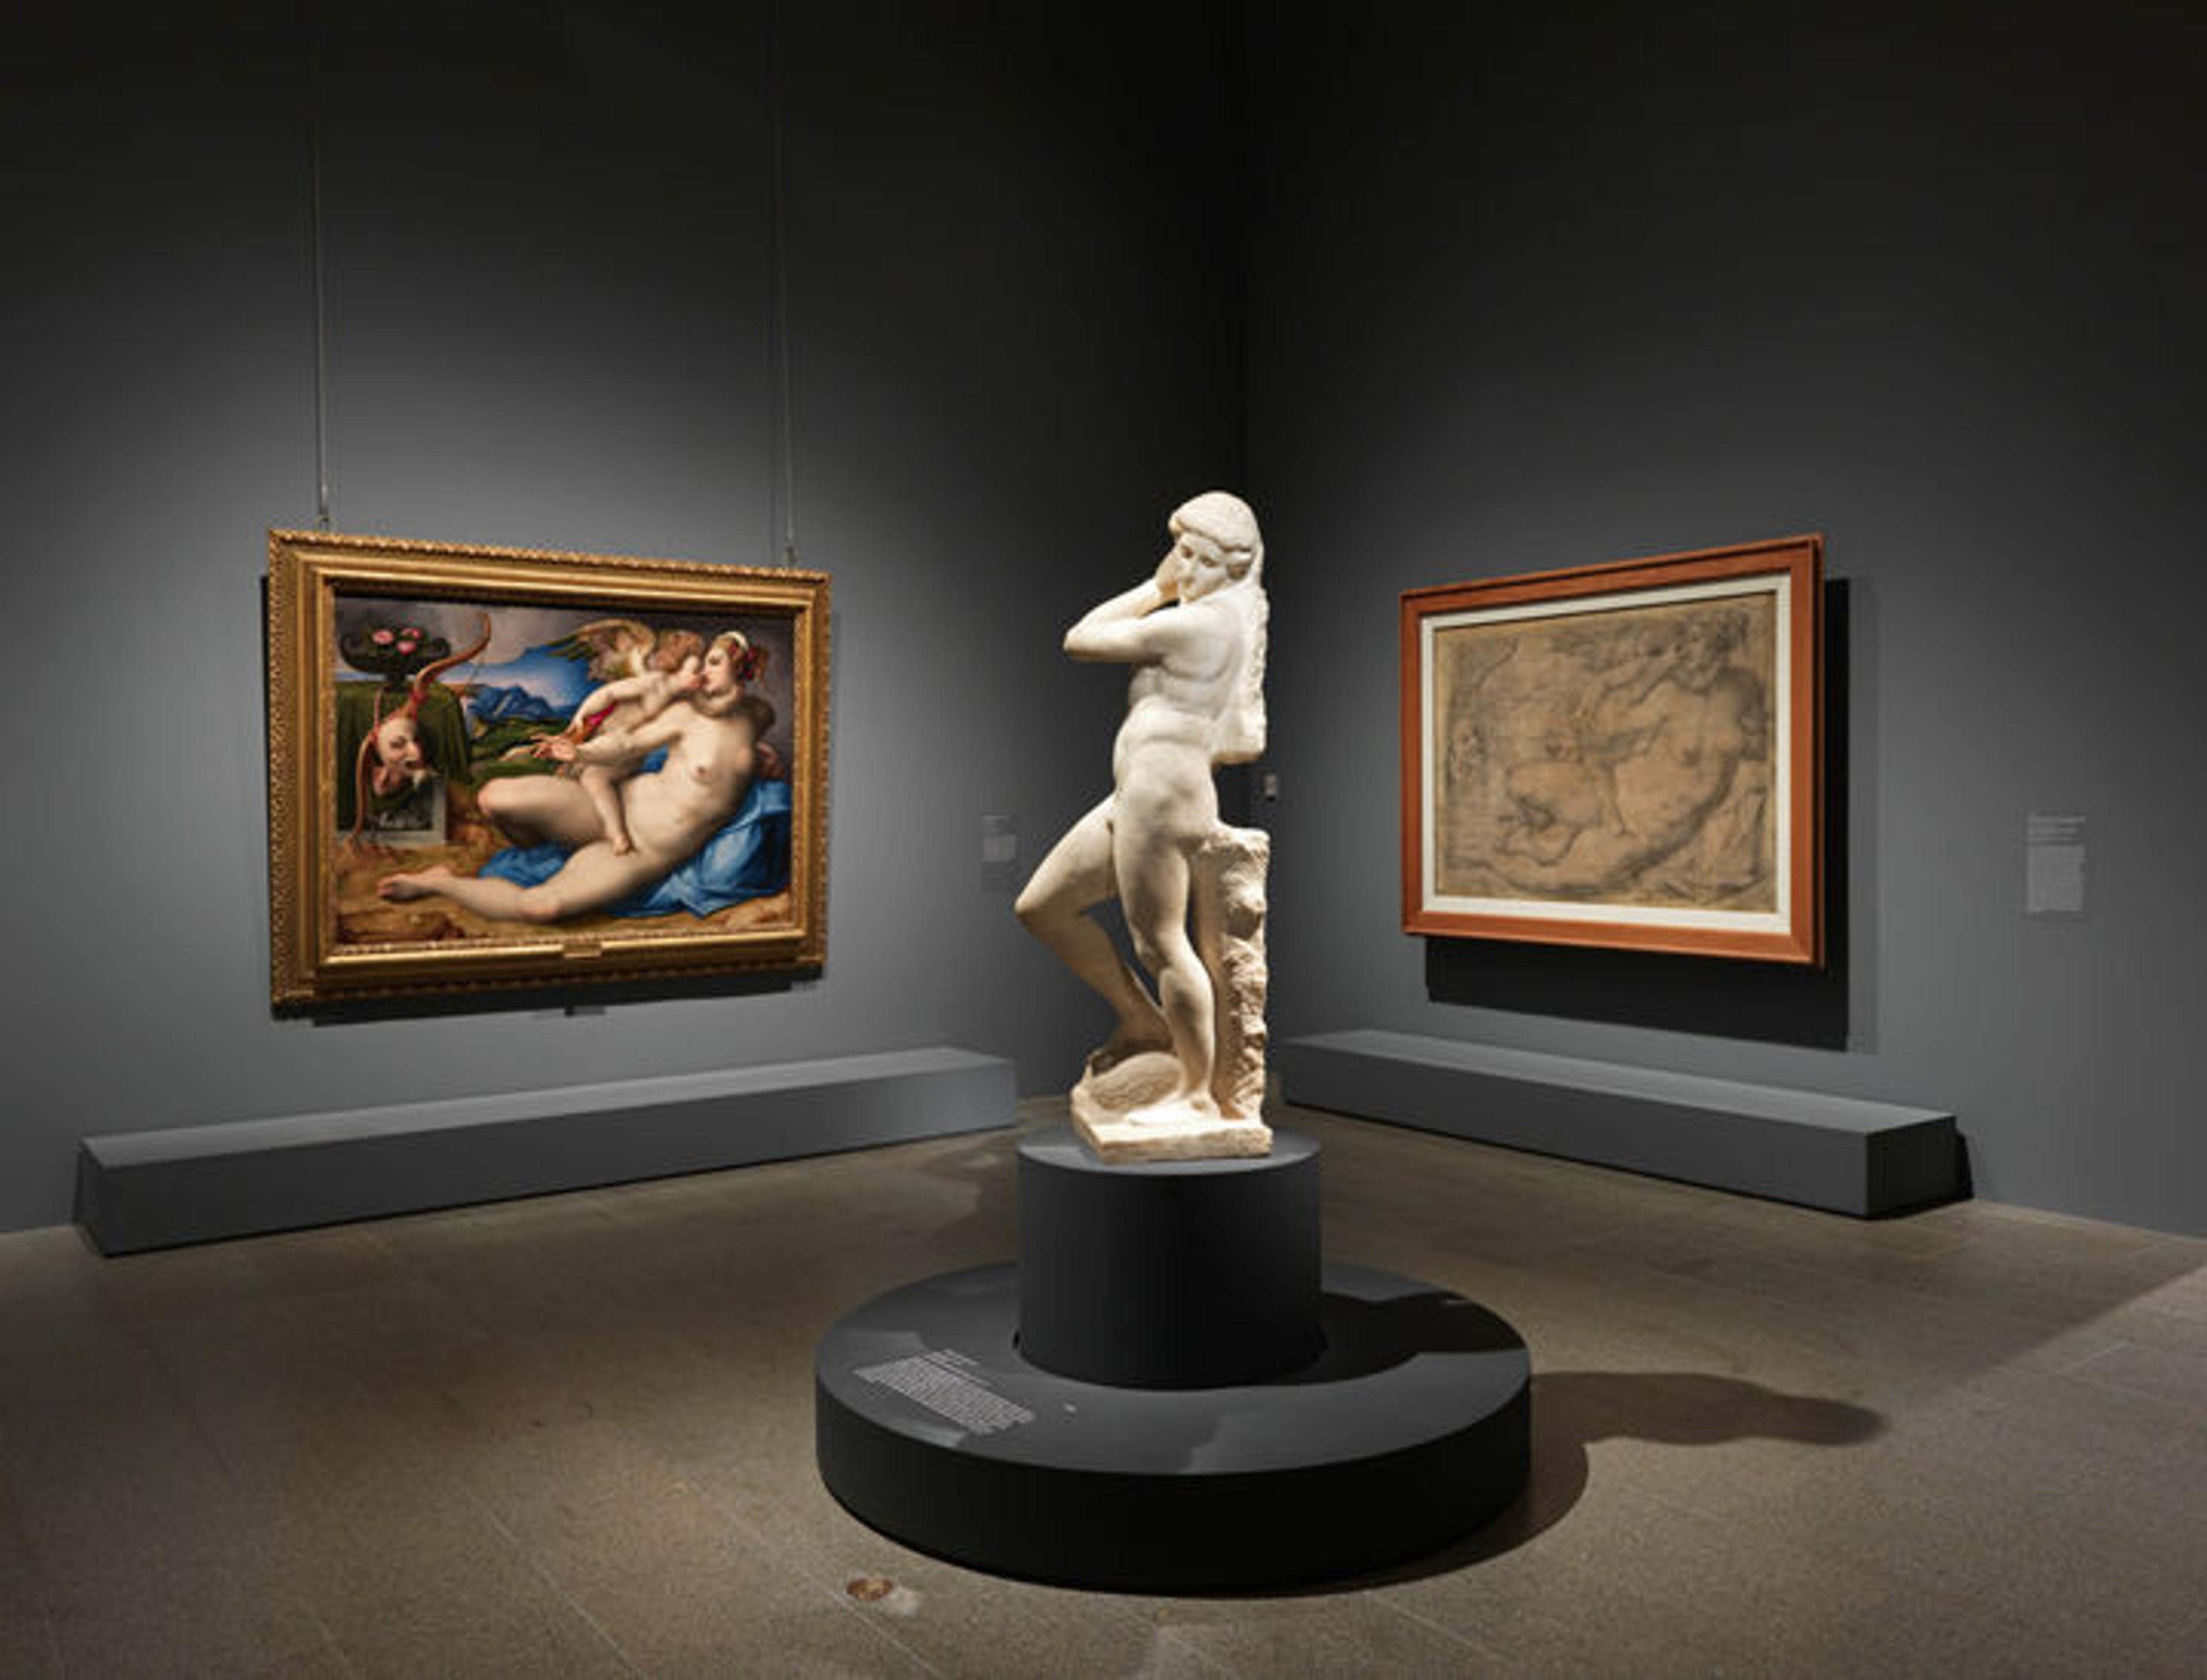 Gallery view of the exhibition 'Michelangelo: Divine Draftsman and Designer' showing a marble sculpture, an oil painting, and a drawn cartoon of Venus and Cupid